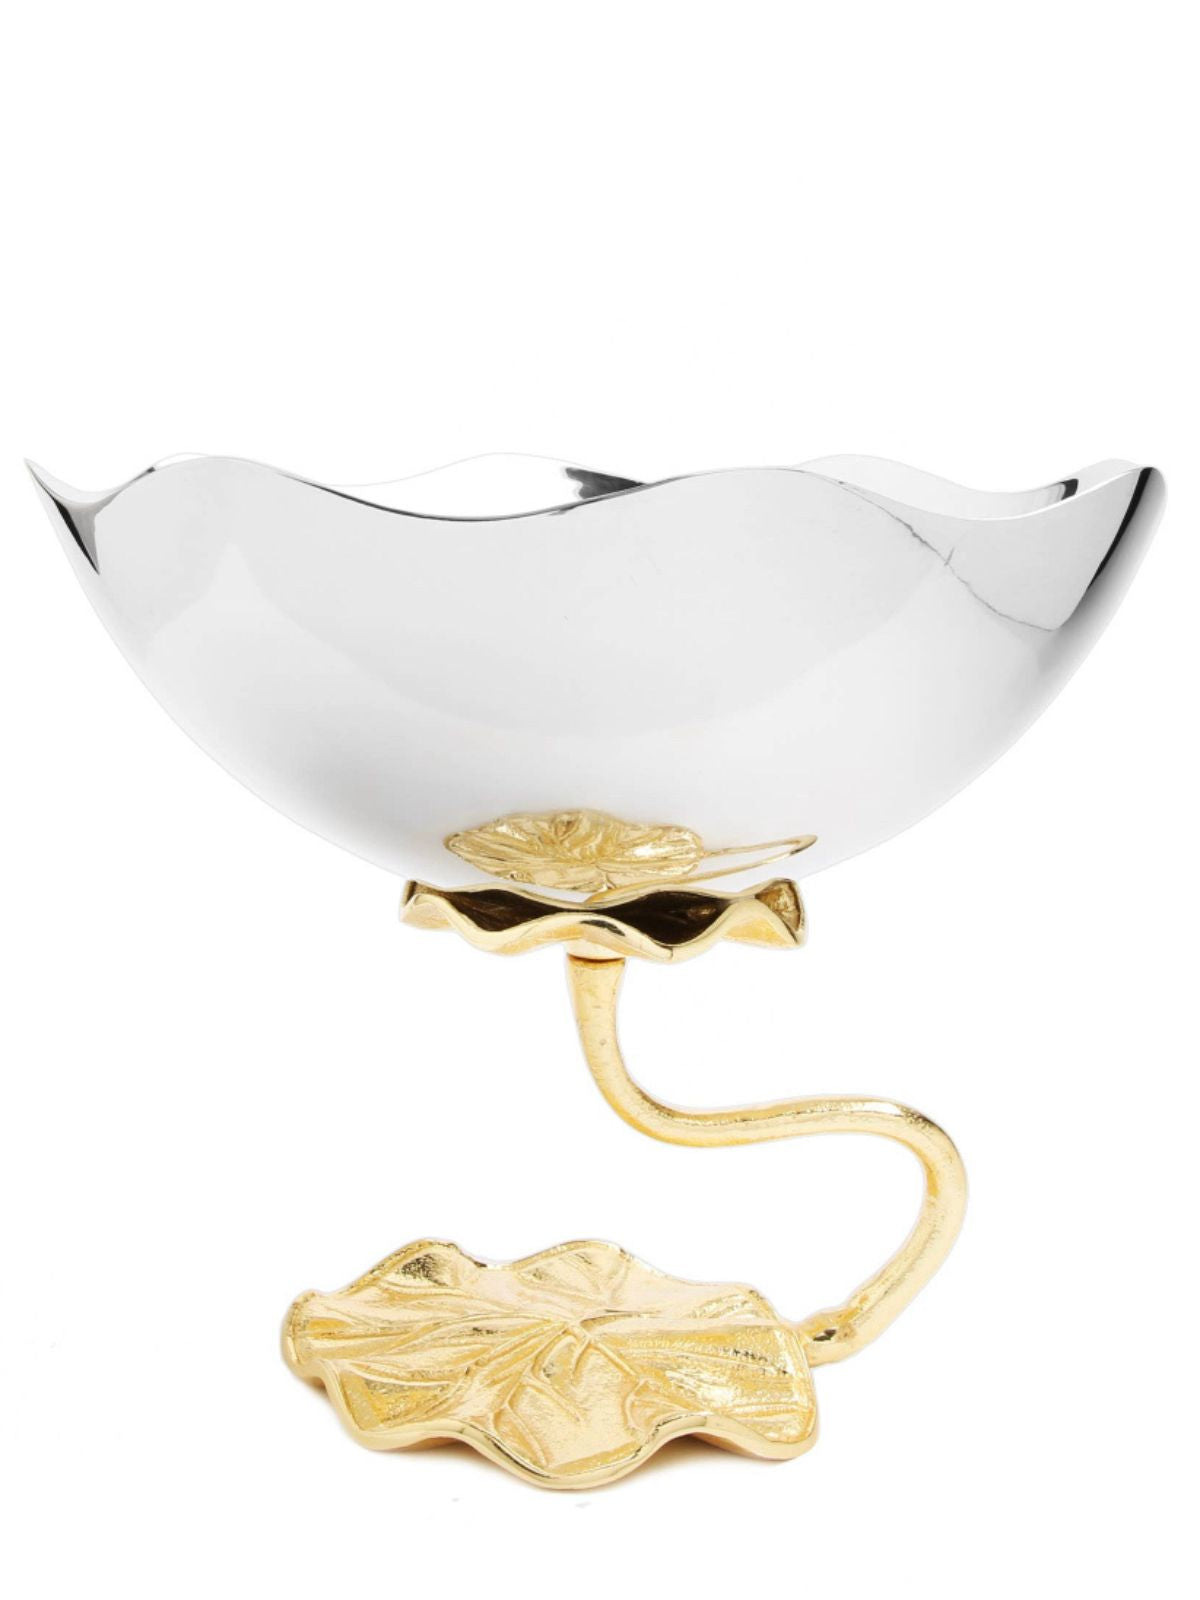 Stainless Steel Centerpiece Decorative Bowl With Luxury Gold Lotus Flower Designed Base. 